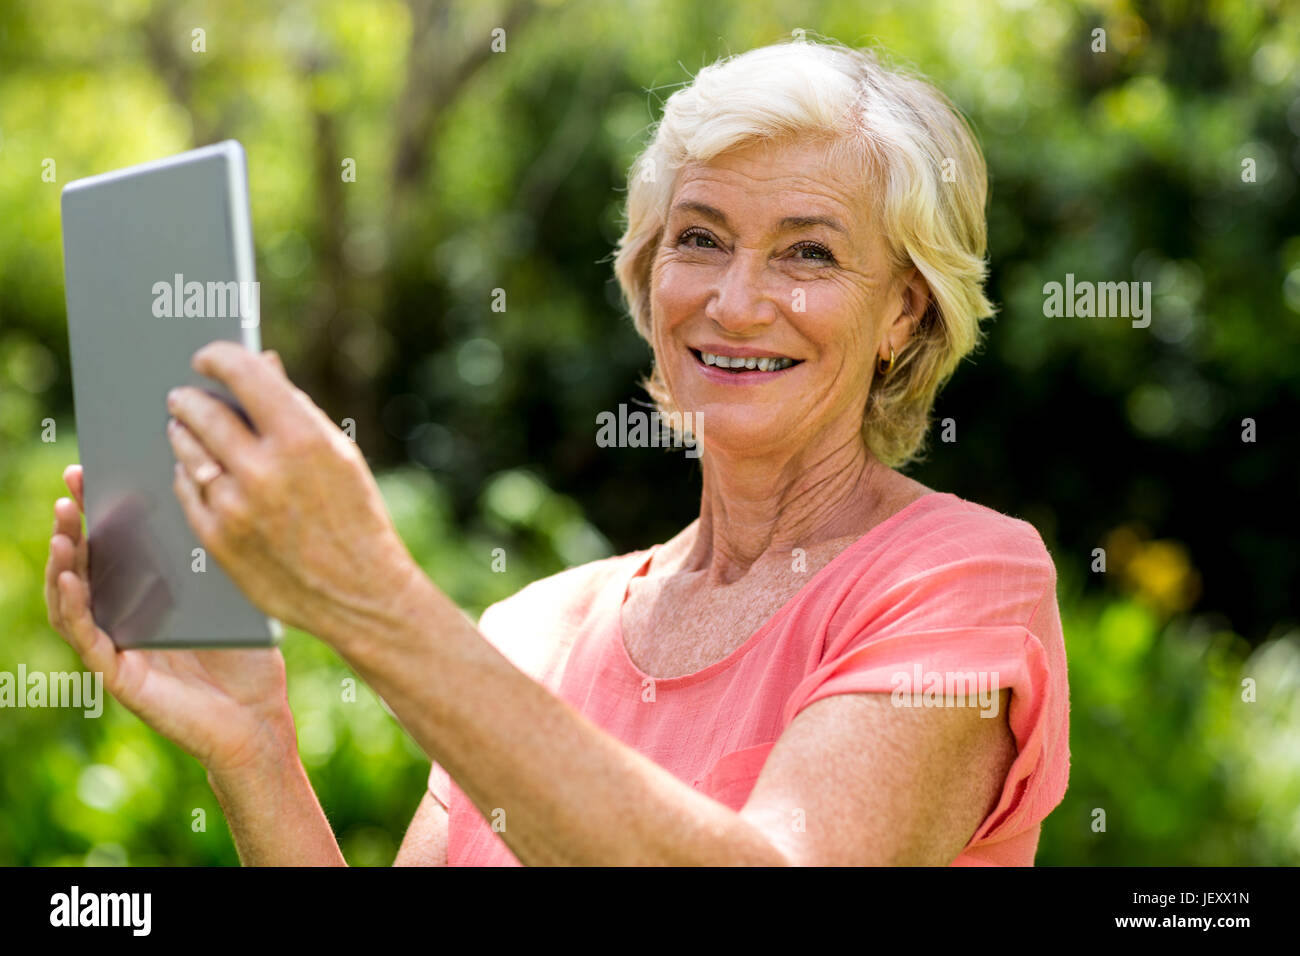 Smiling senior woman holding tablet in yard Banque D'Images